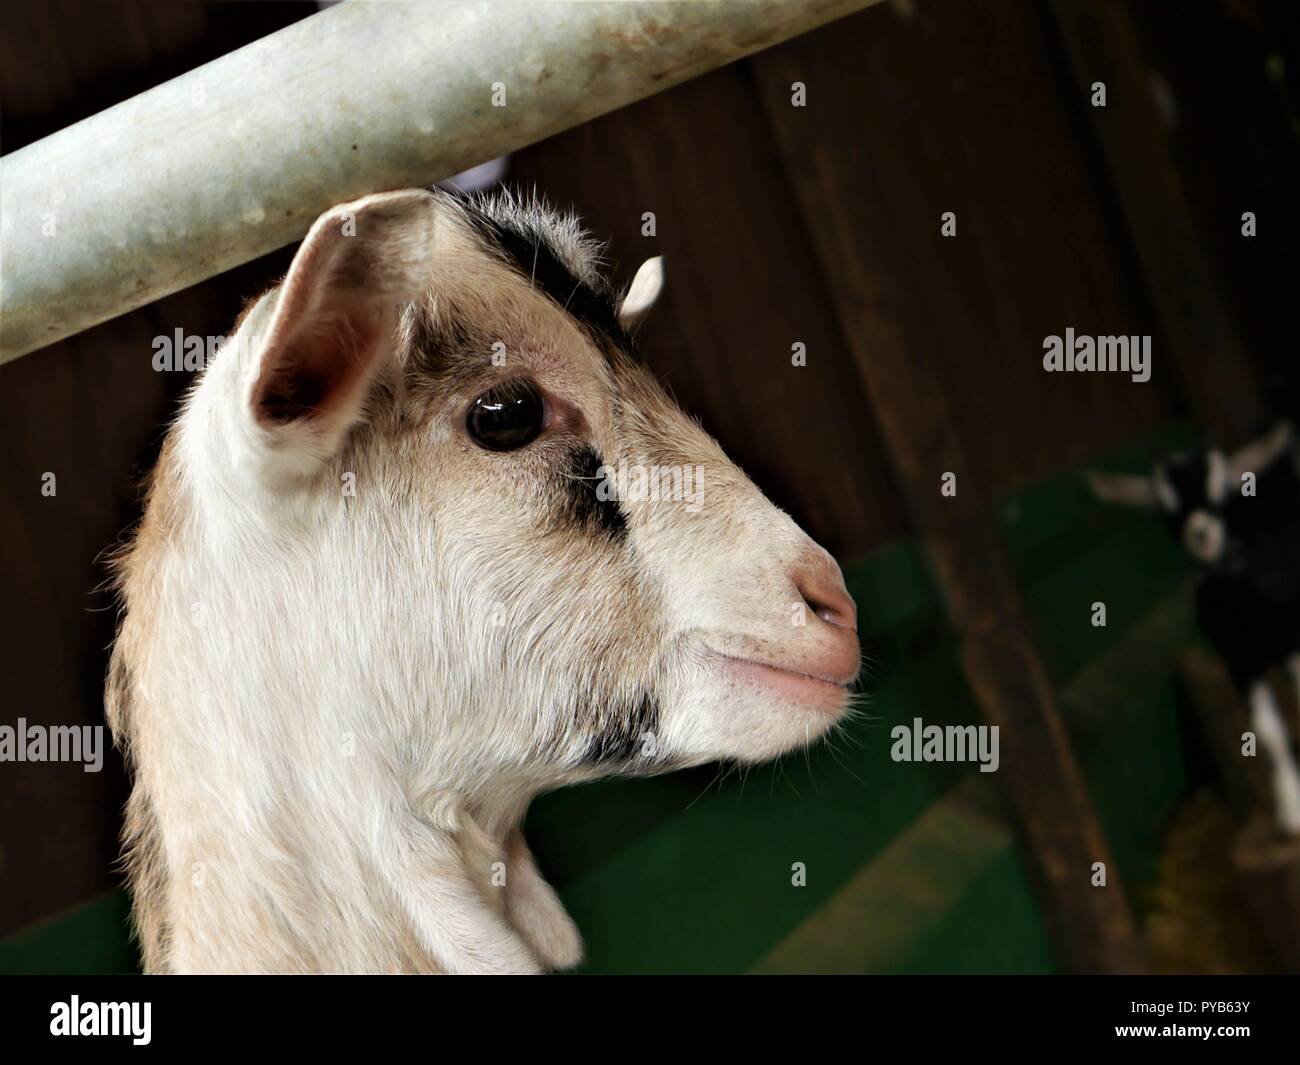 A baby goat (kid) on a petting farm Stock Photo